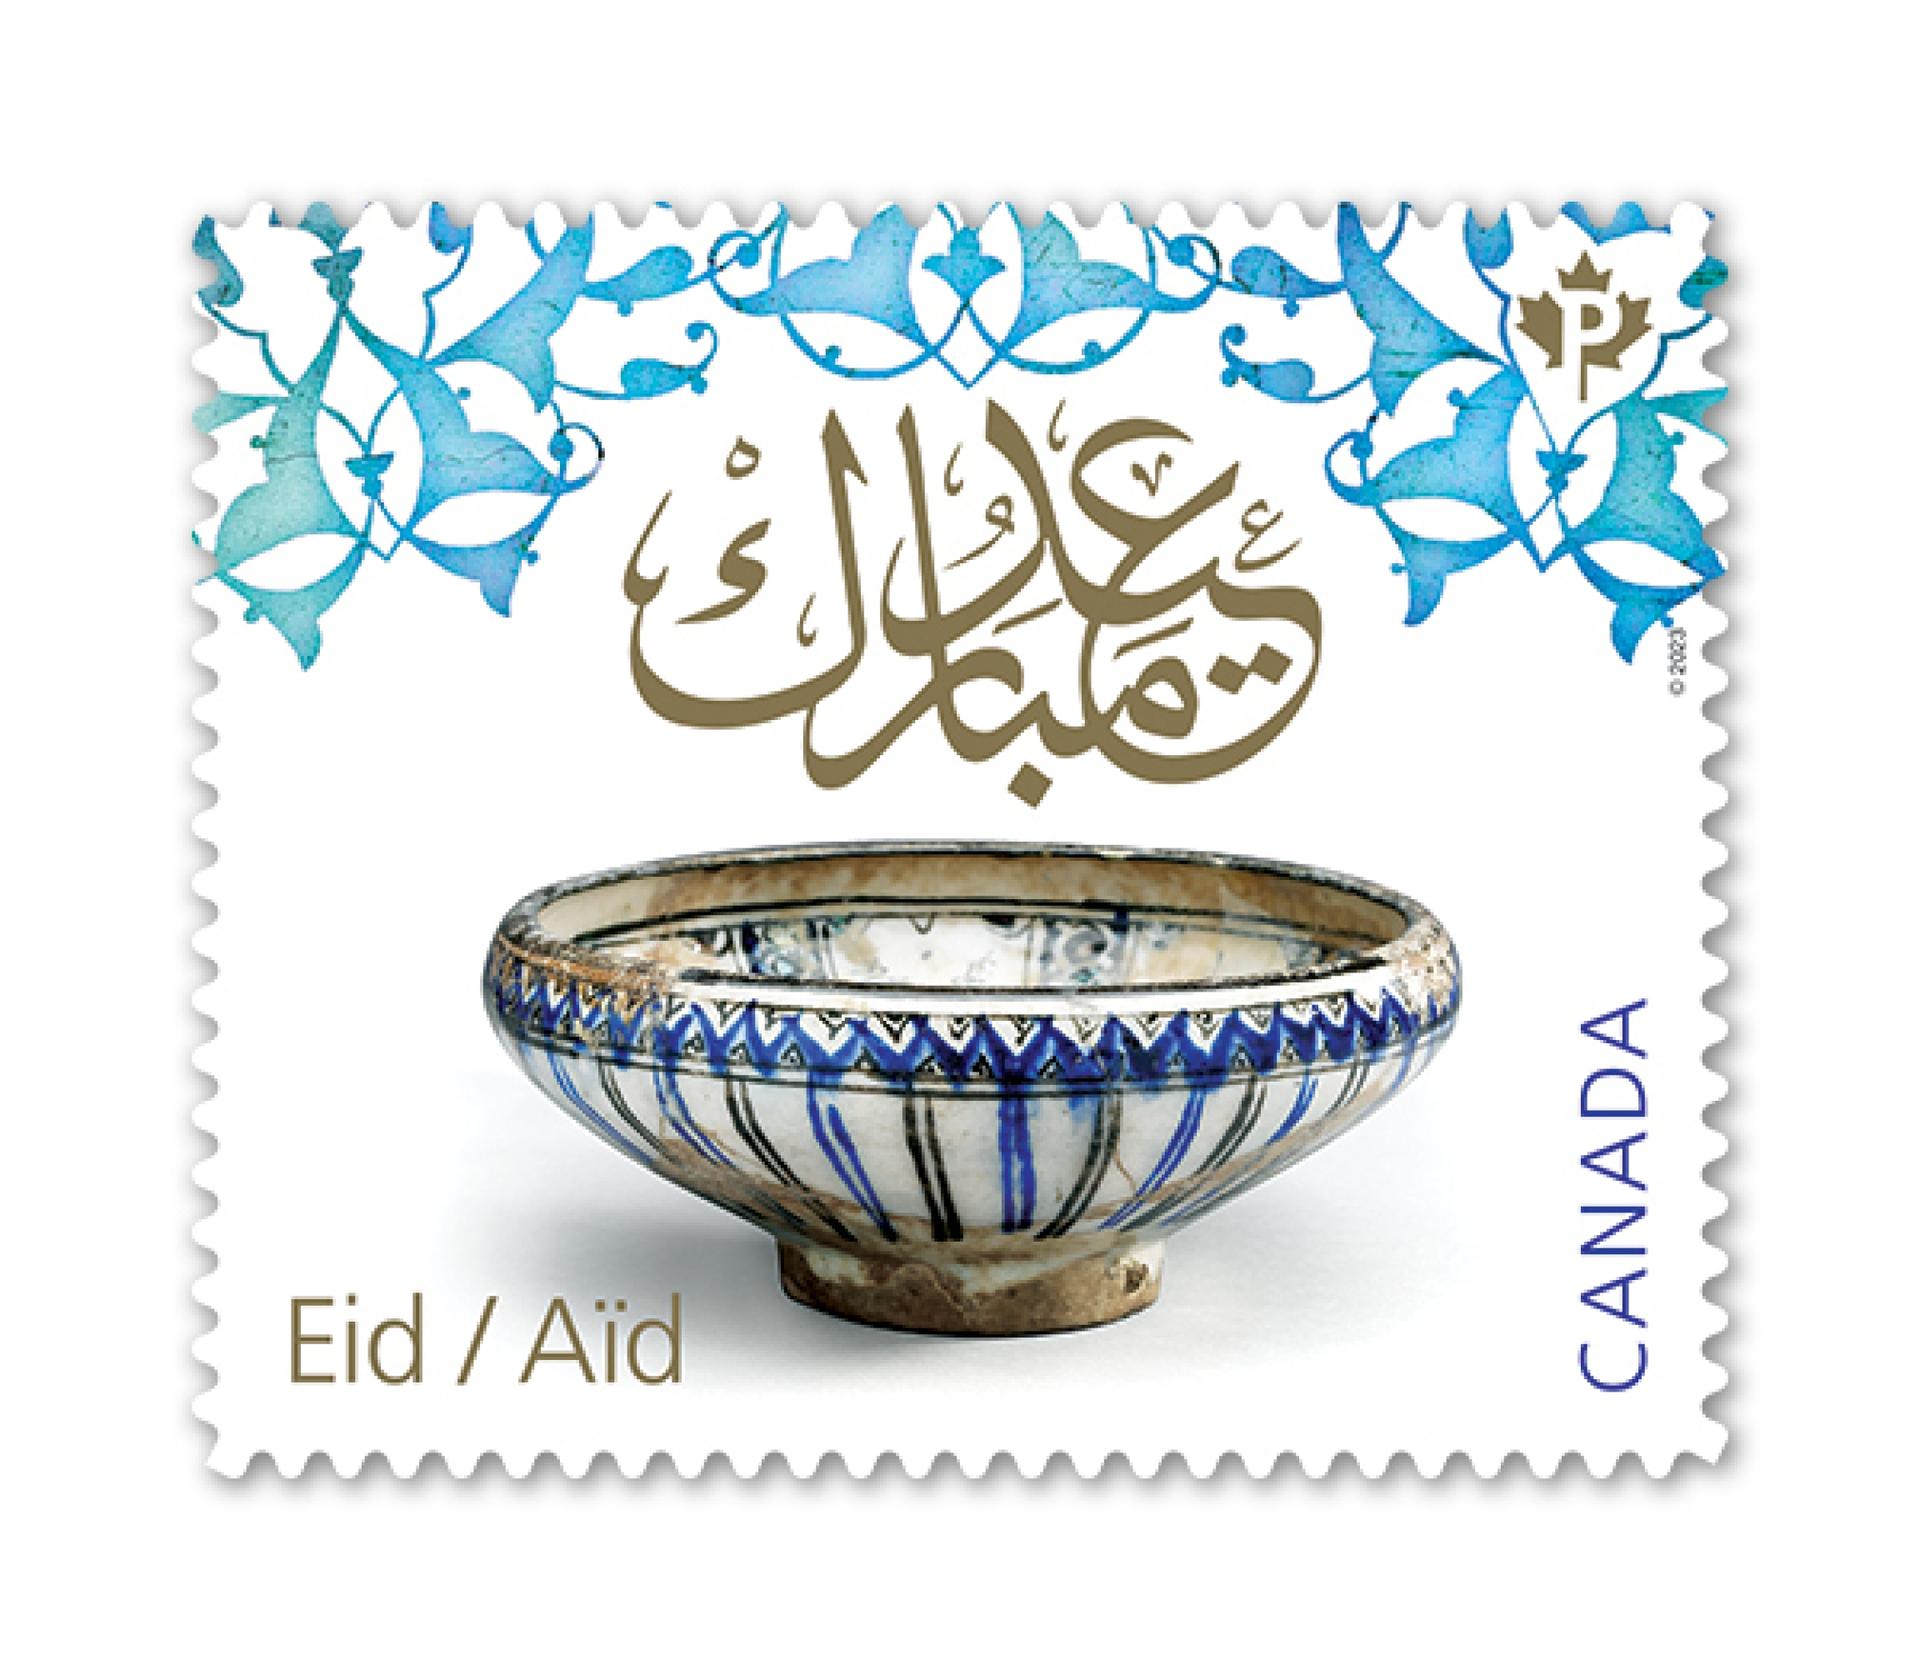 This year's Eid stamp design by Canada Post features an antique bowl that was made 700 years ago in Iran.